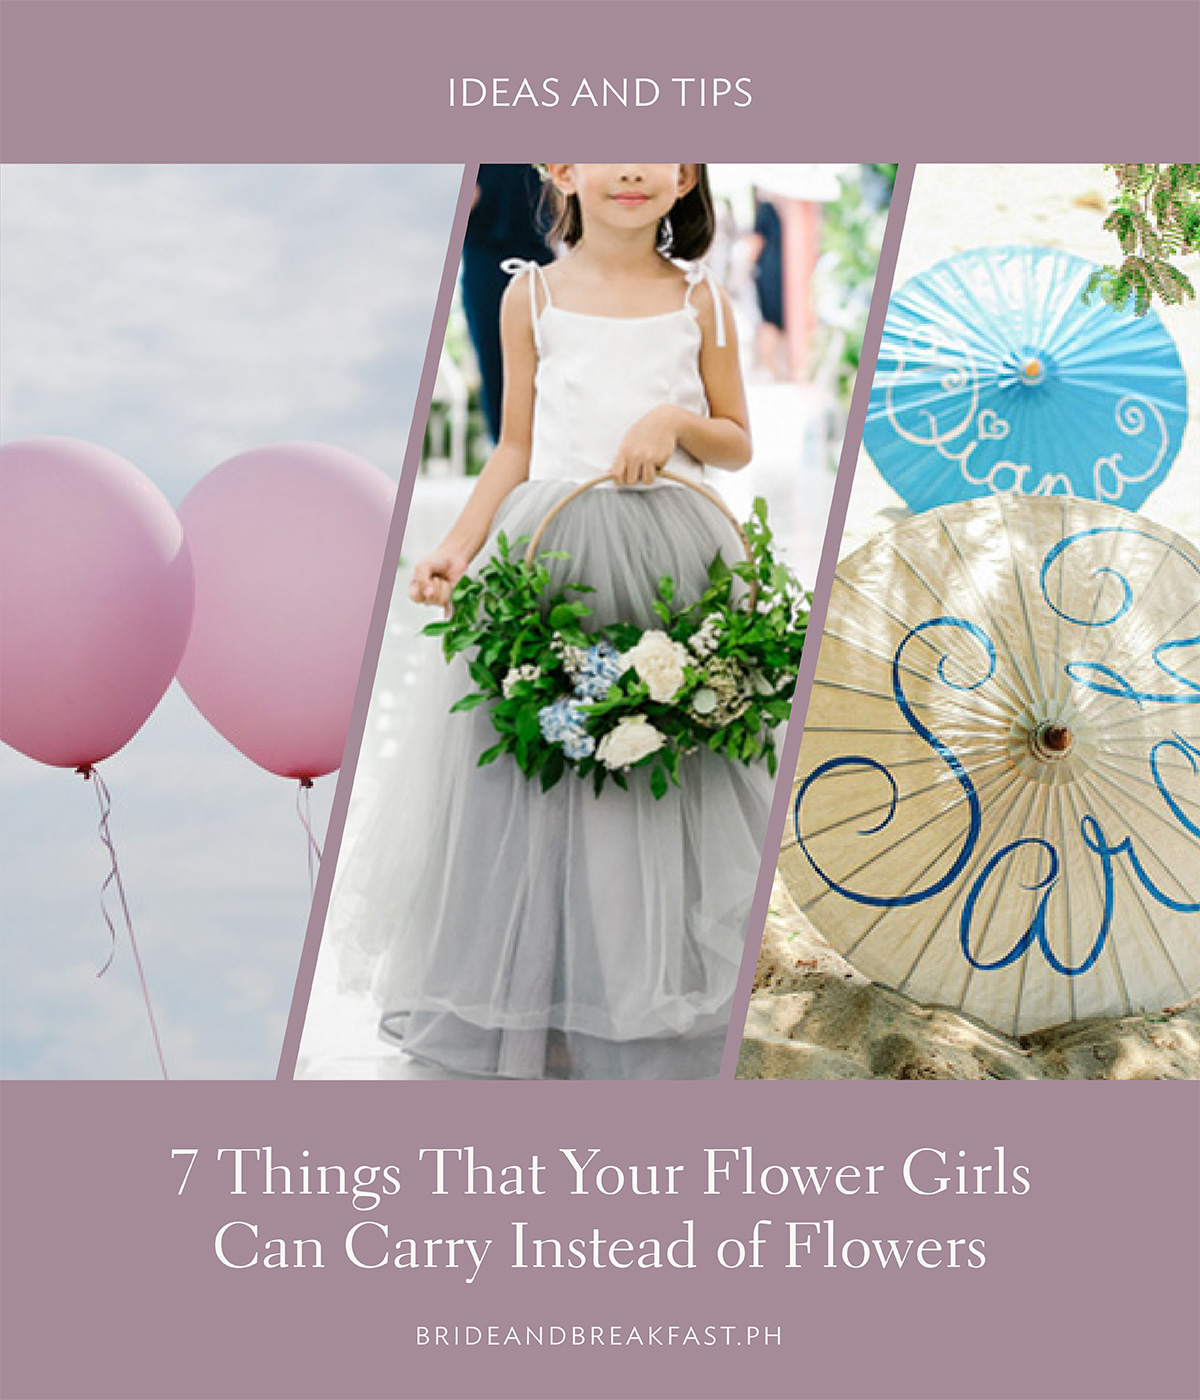 Bride and Breakfast: Ideas and Tips 7 Things That Your Flower Girls Can Carry Instead of Flowers